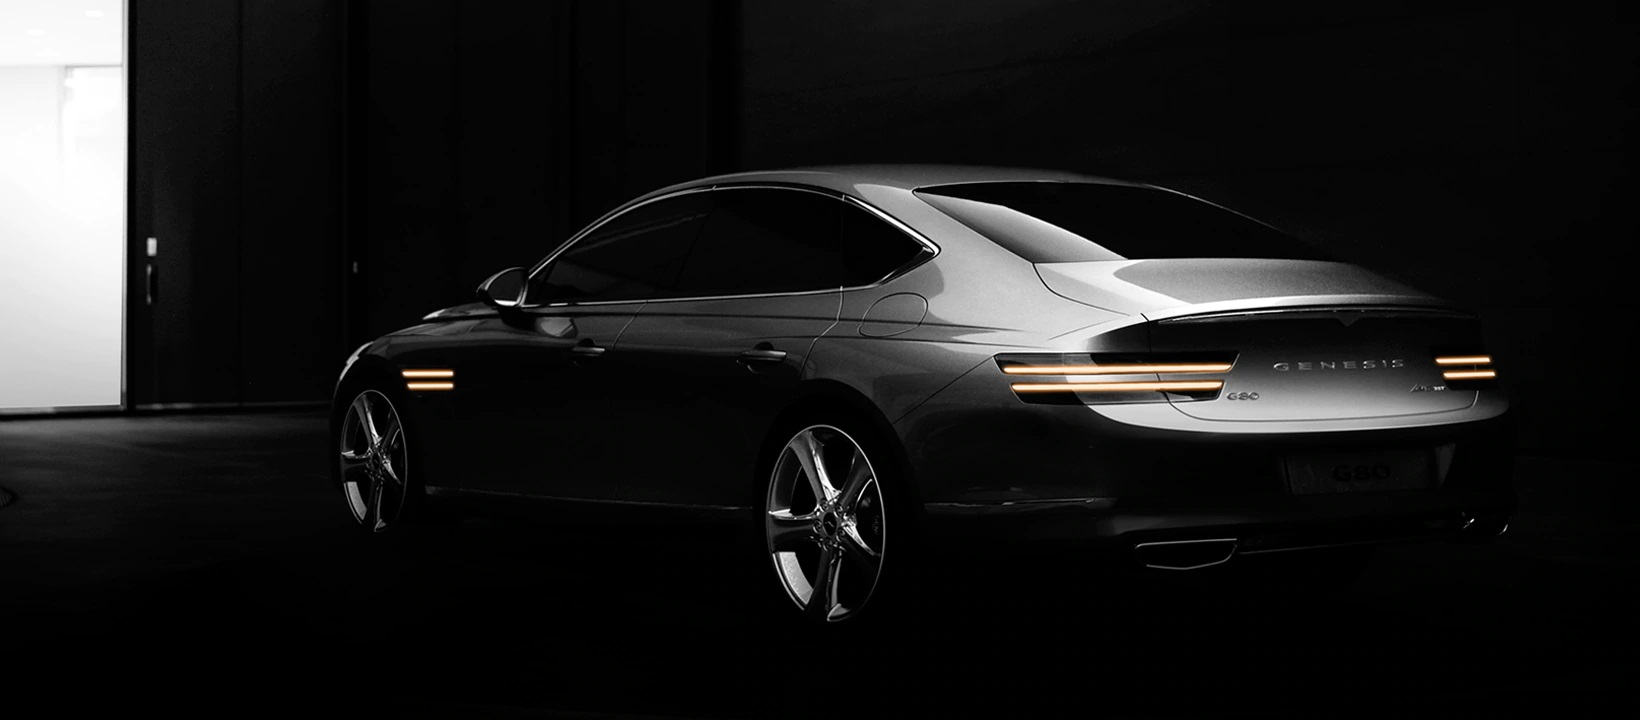 An impressive executive saloon is lit from above to highlight how the bodywork elegantly arcs from front to rear